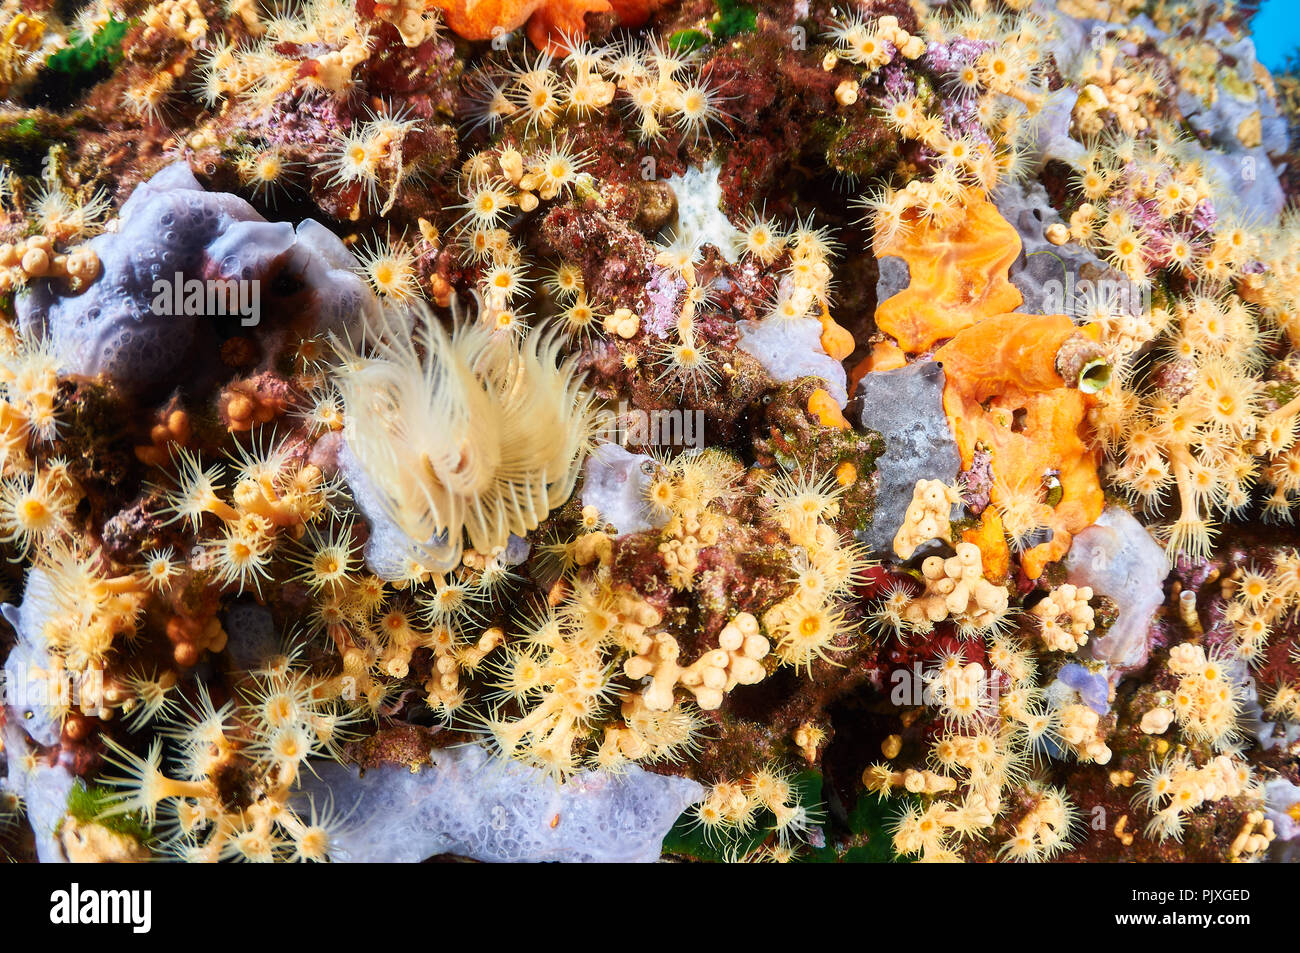 Yellow cluster anemone (Parazoanthus axinellae) colony with a variety of sponges and encrusting marine life (Formentera,Balearic Islands,Spain) Stock Photo